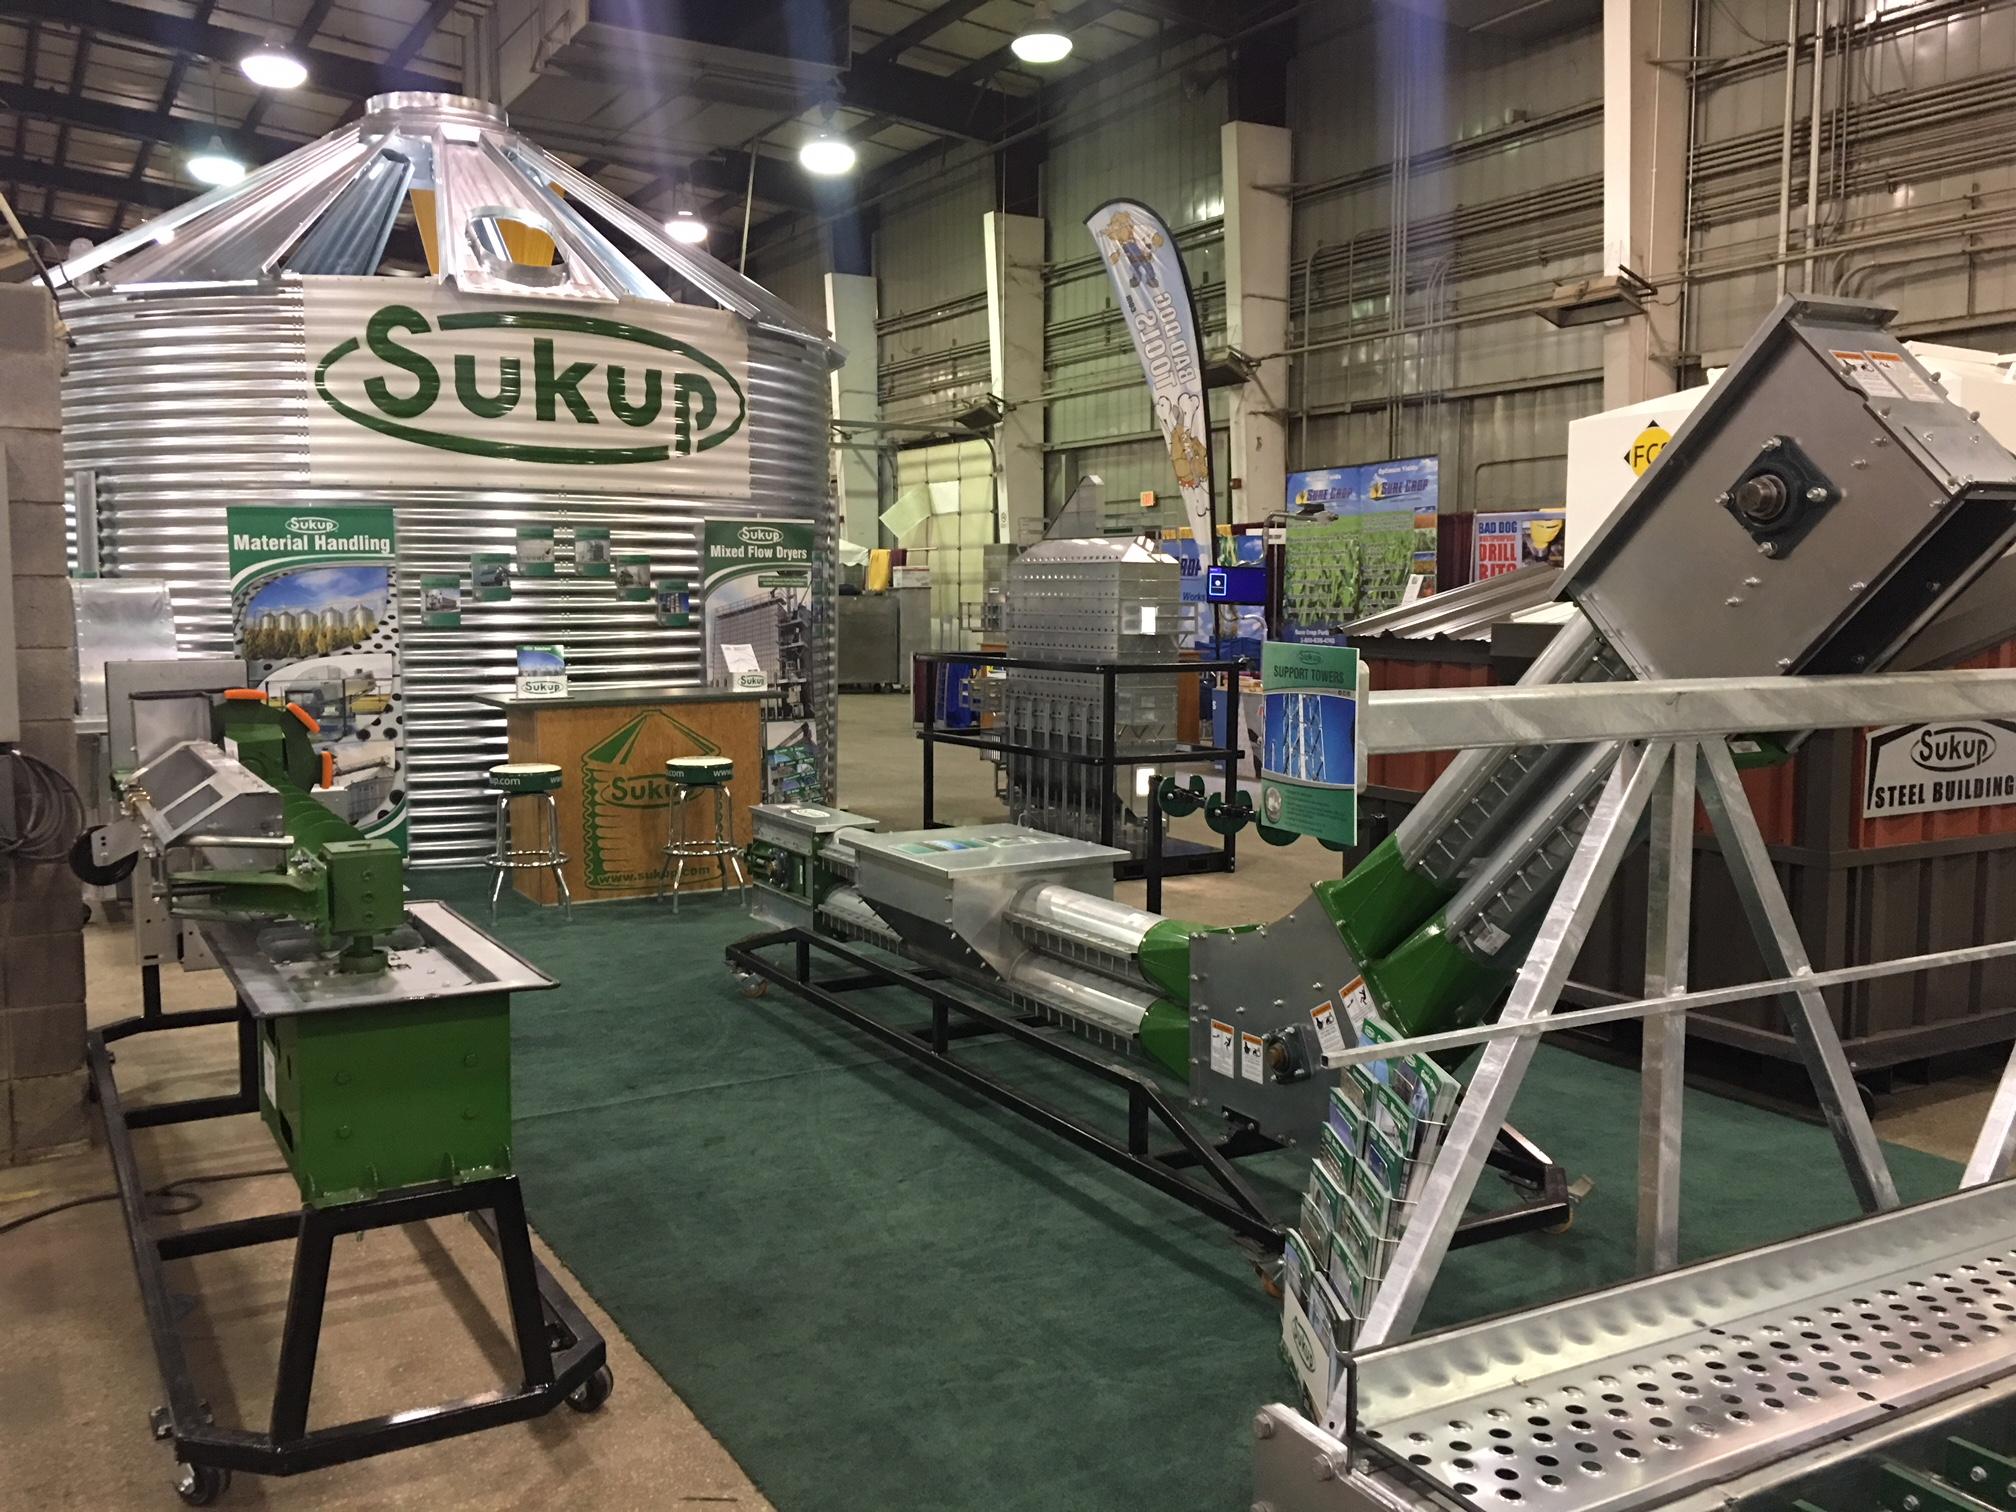 Sukup Manufacturing Co. at the Western Farm Show in 2018.